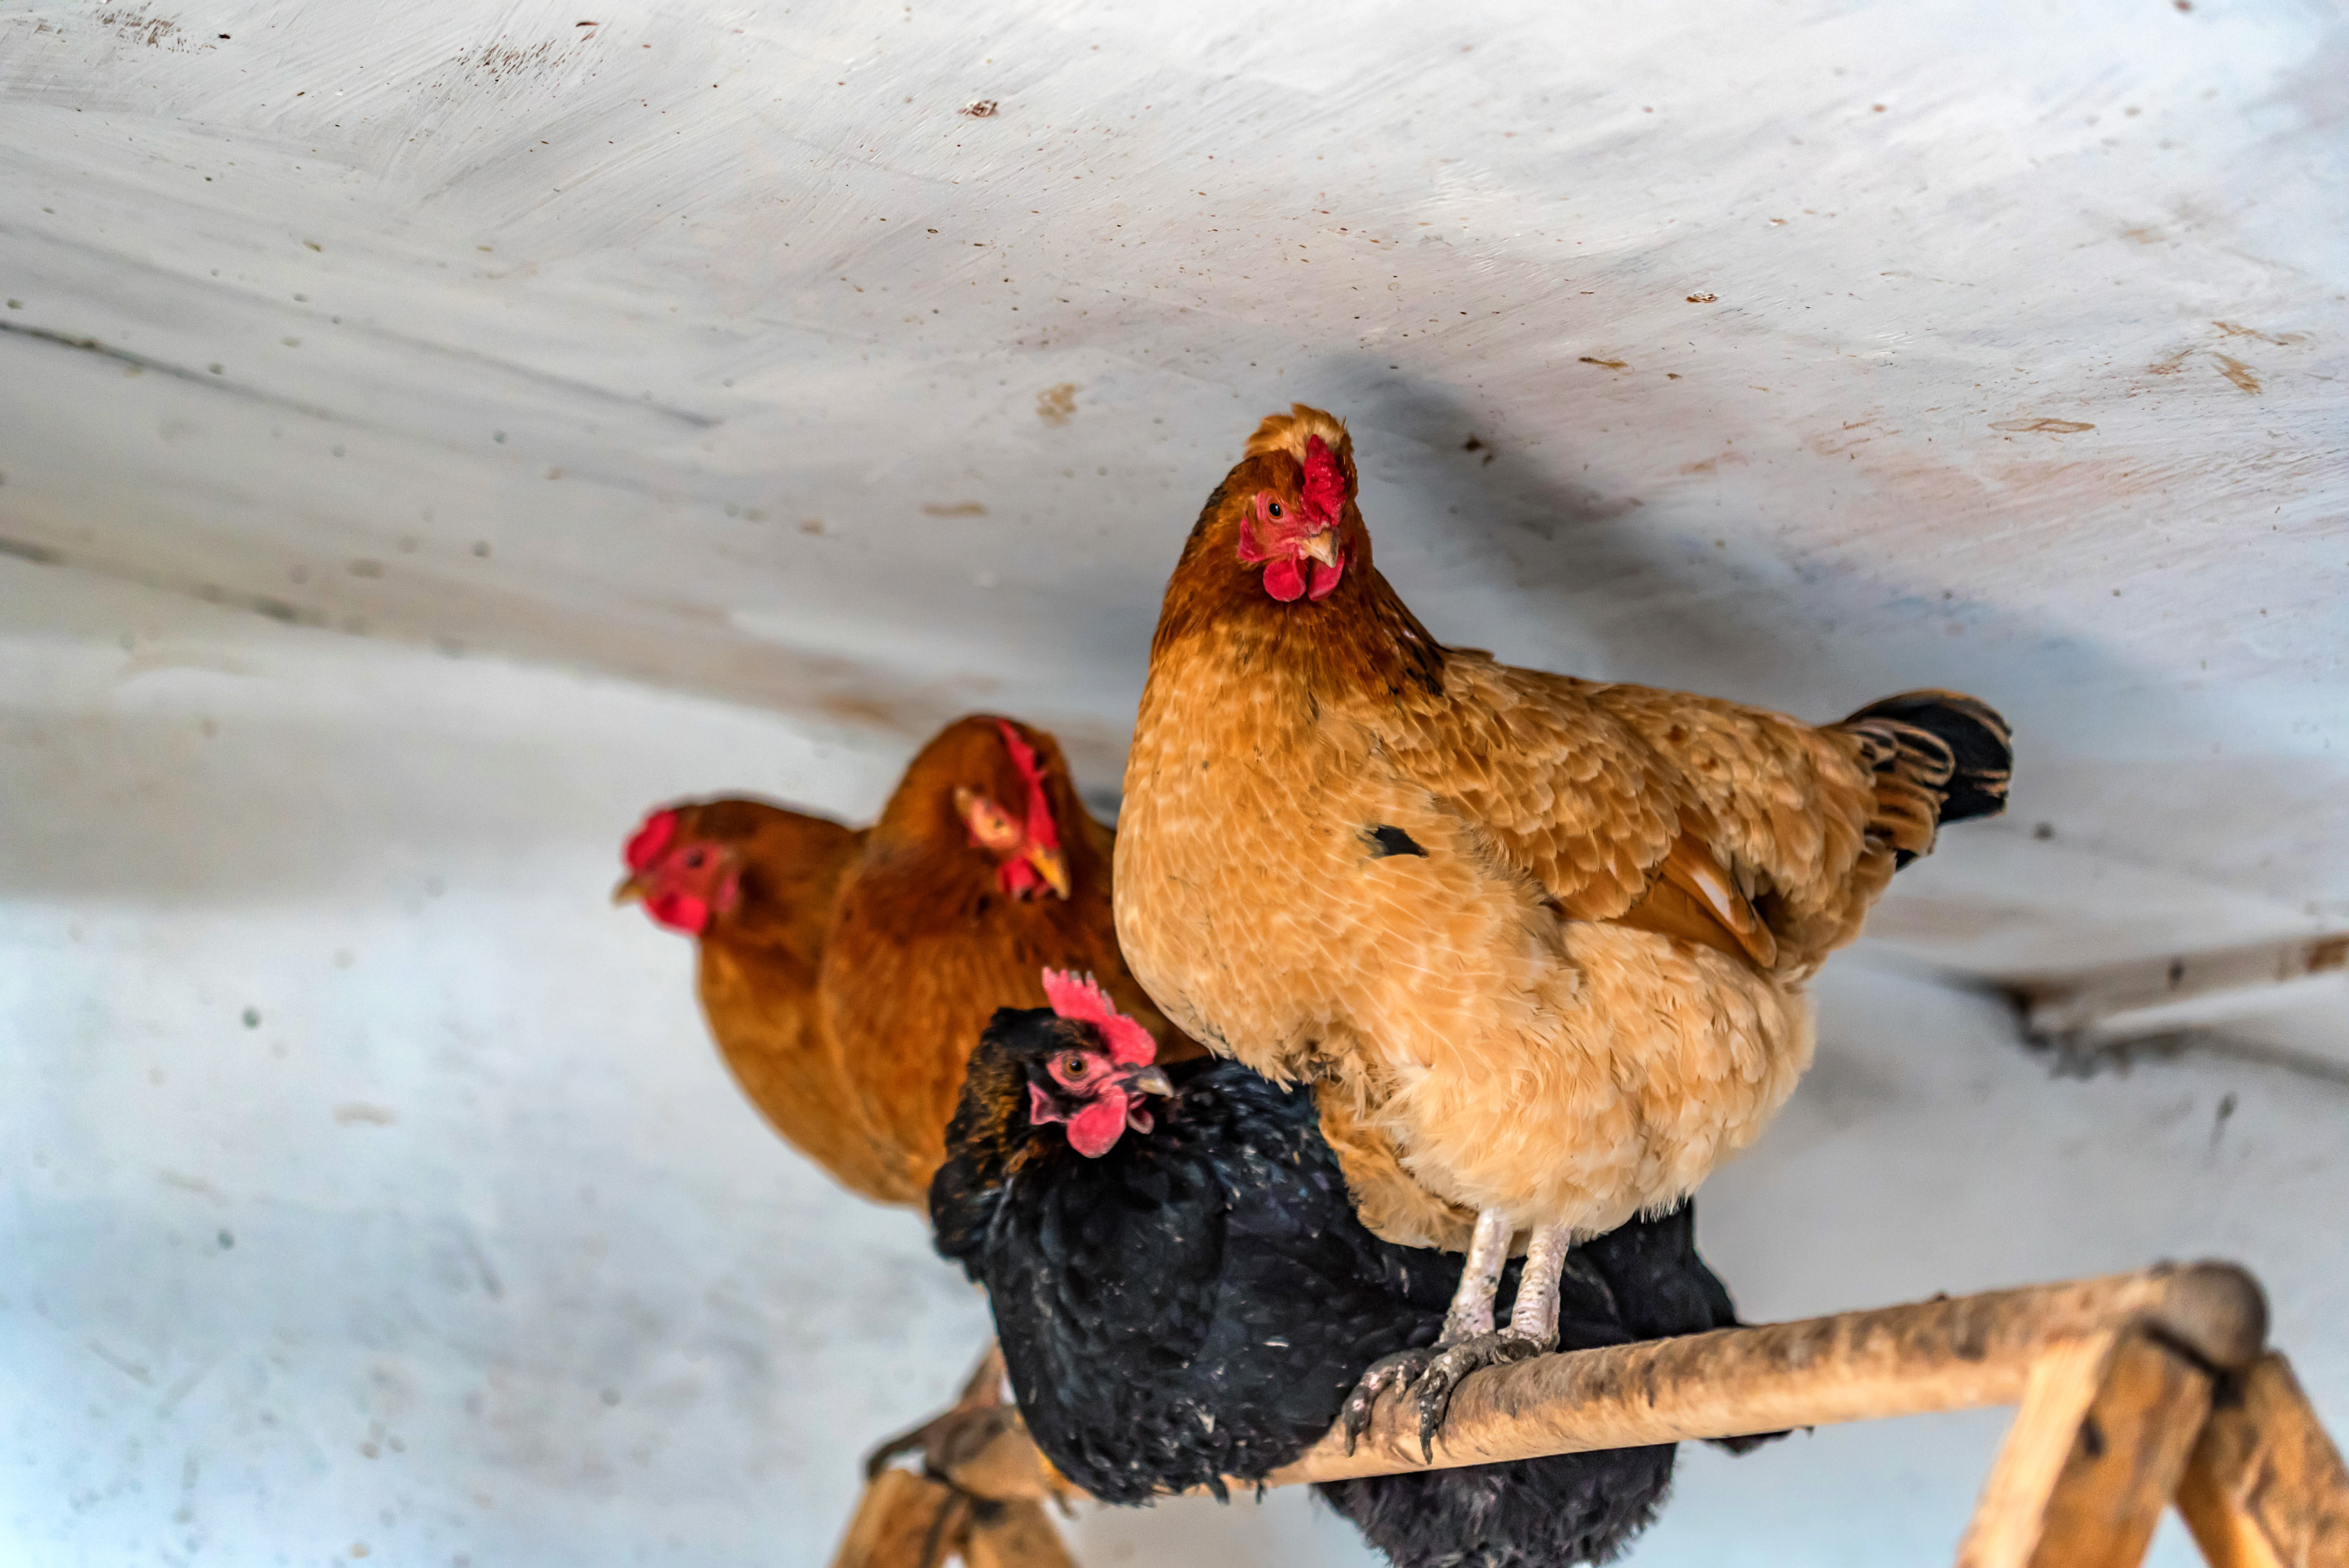 Round roosts are ideal additions to poultry houses